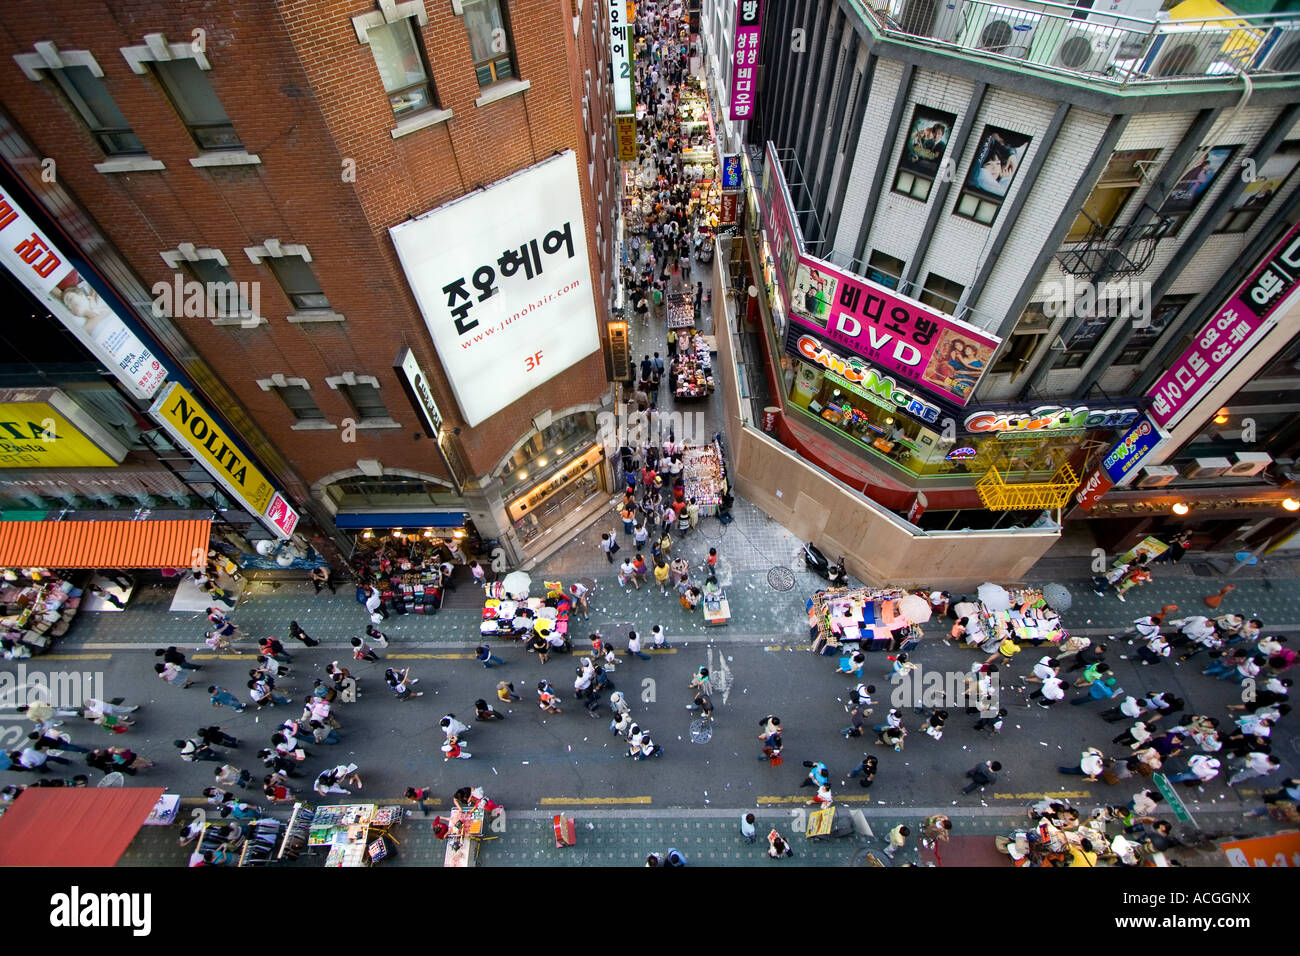 View from Above of Narrow Shopping Street Myongdong Commercial Market Seoul South Korea Stock Photo